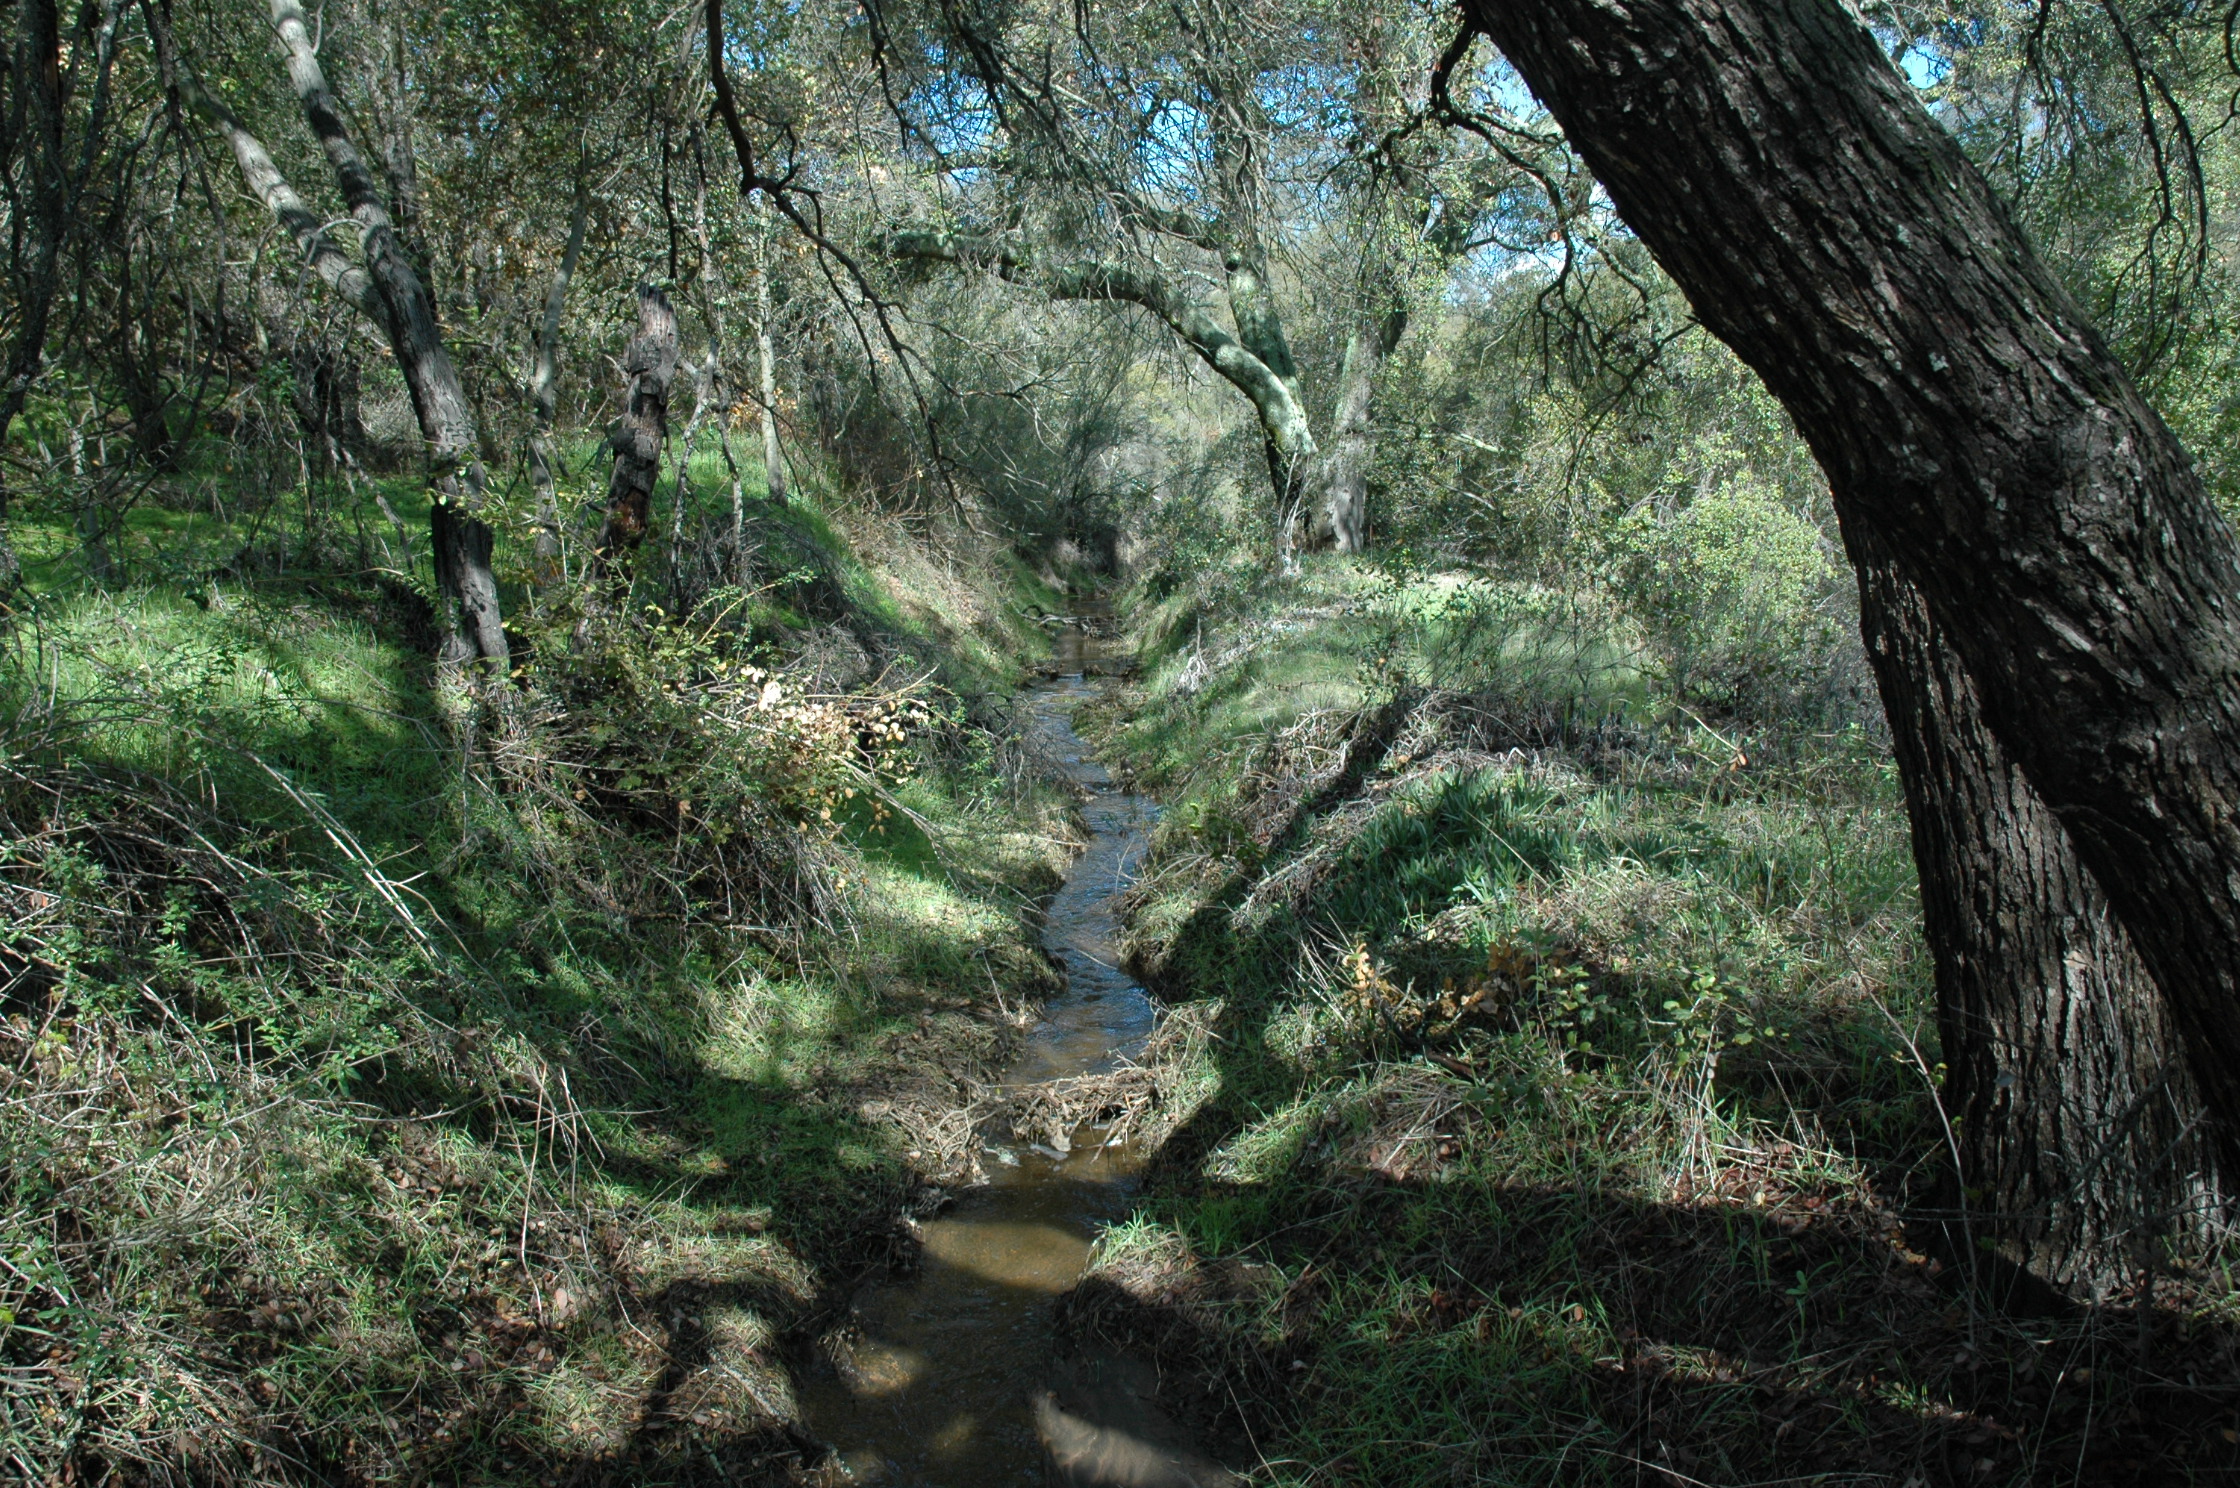 Creek and forest at Deer Park